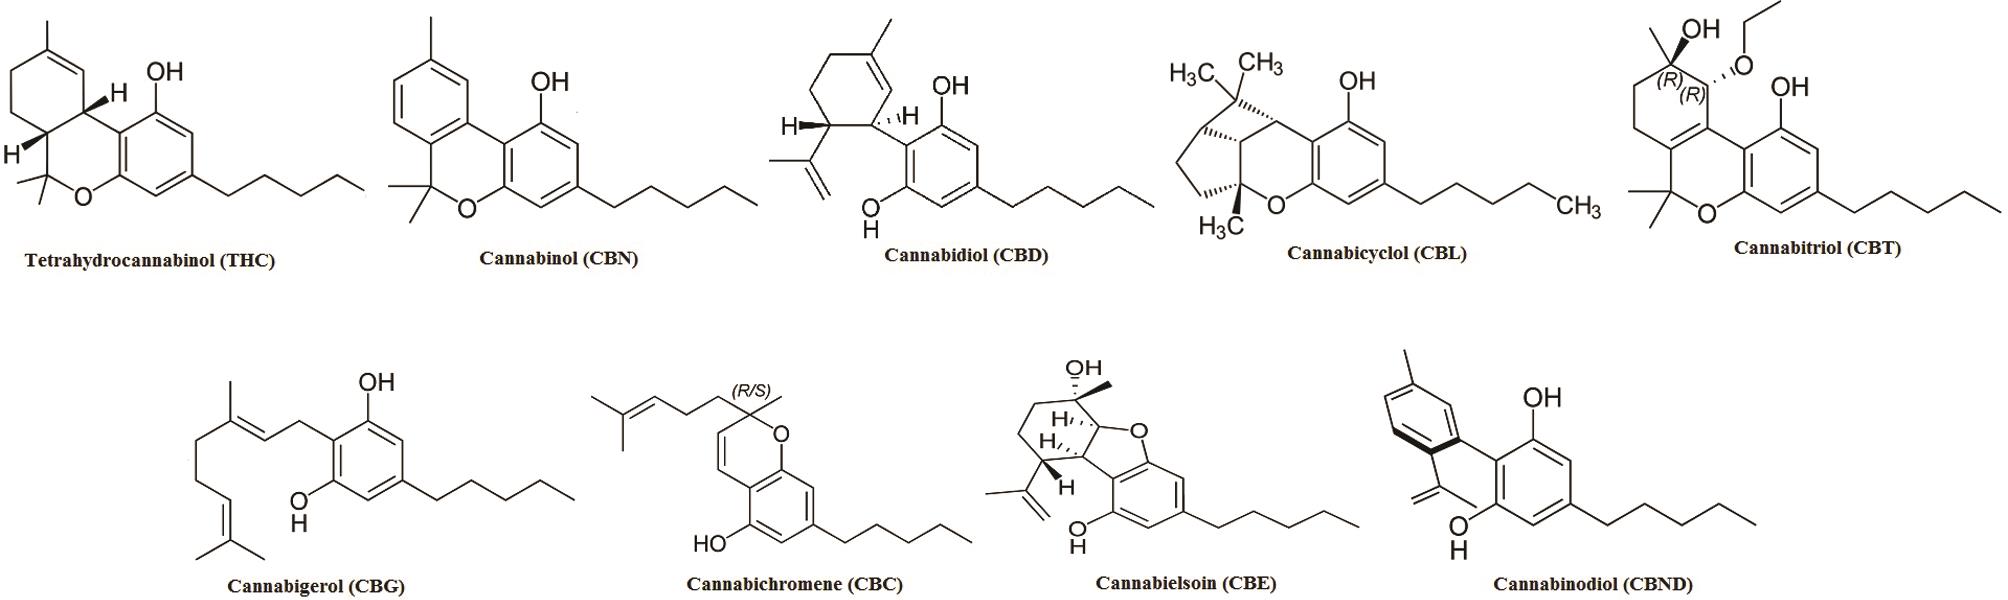 Structures of various cannabinoids isolated from <italic>C. sativa</italic> and their derivatives.